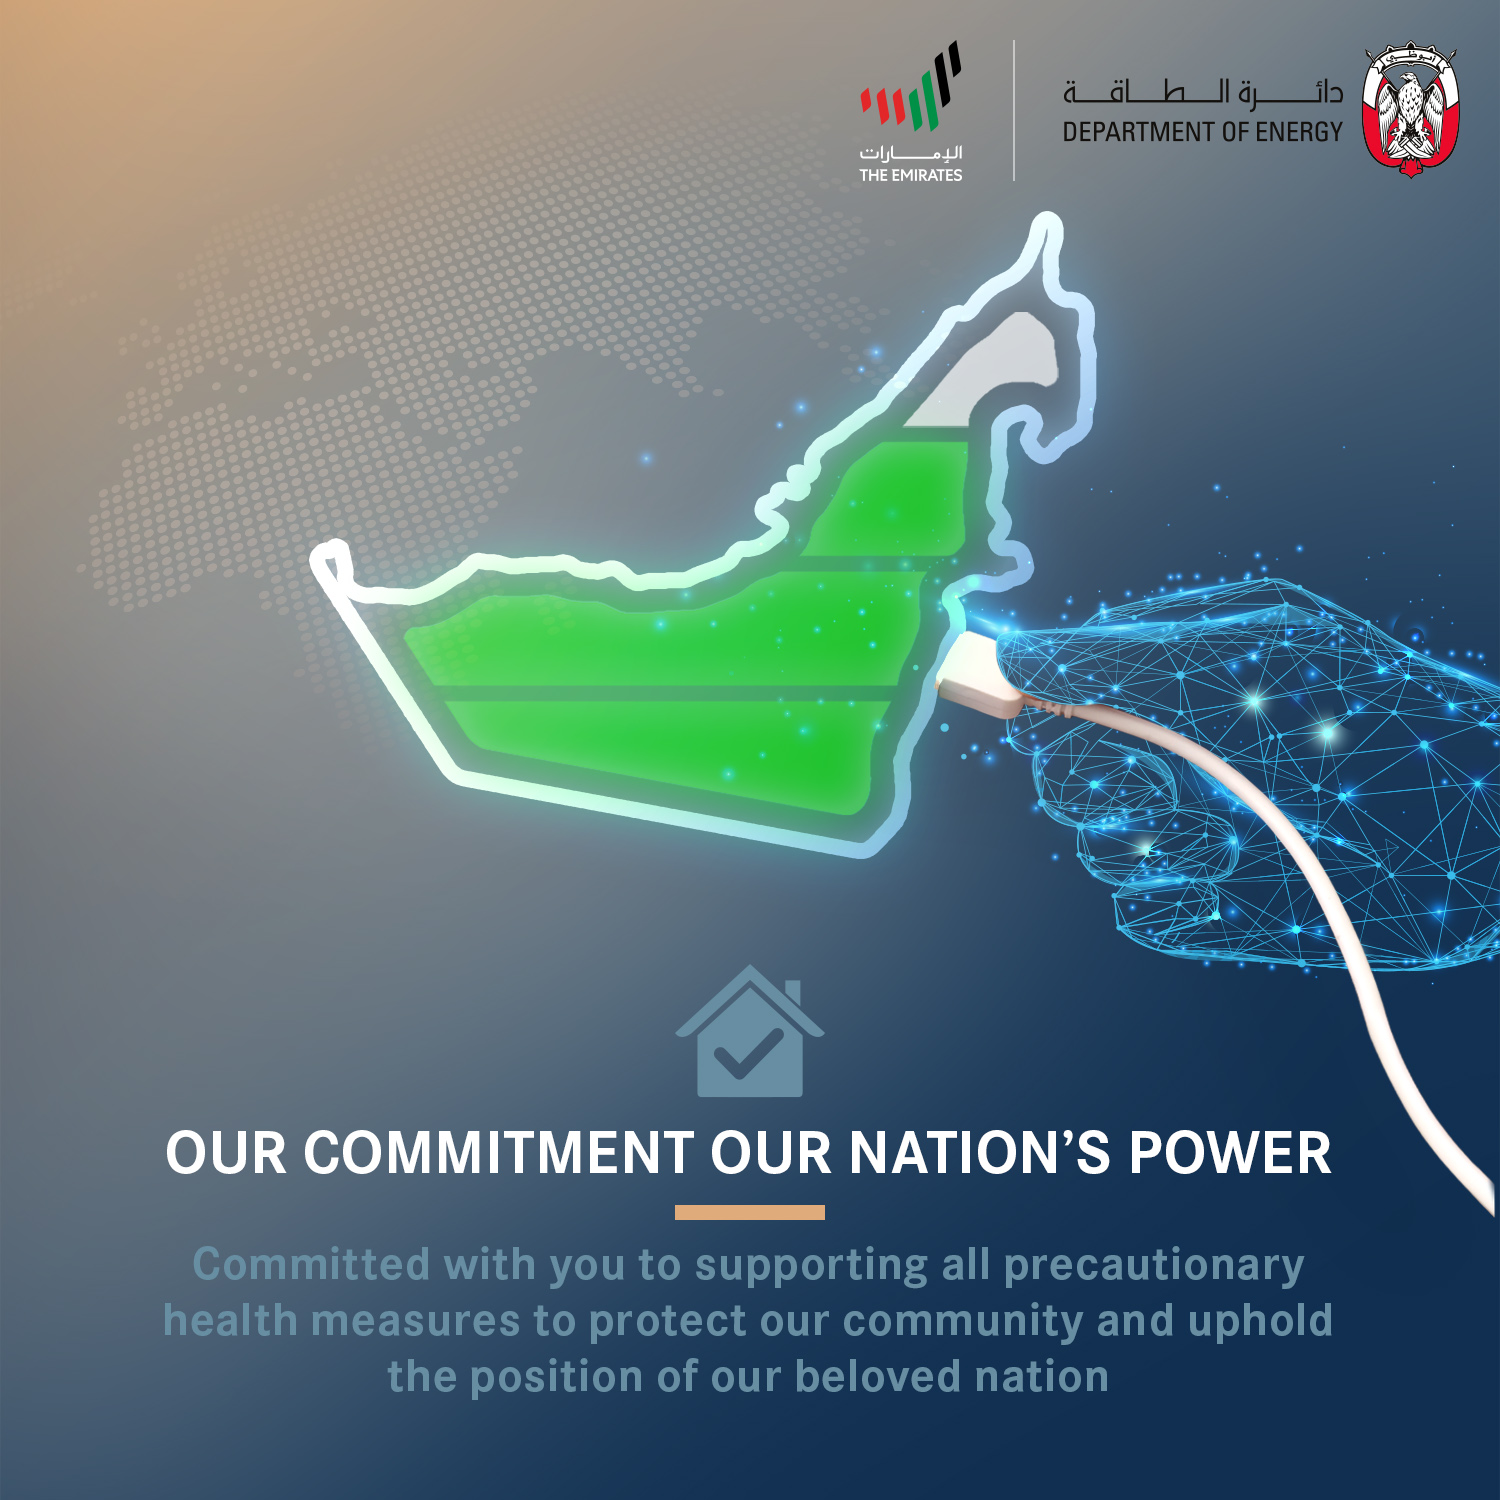 Abu Dhabi Department Of Energy Launches ‘Our Commitment – Our Nation’s Power’ Campaign To Showcase Energy Sector’s Capacity And Resilience